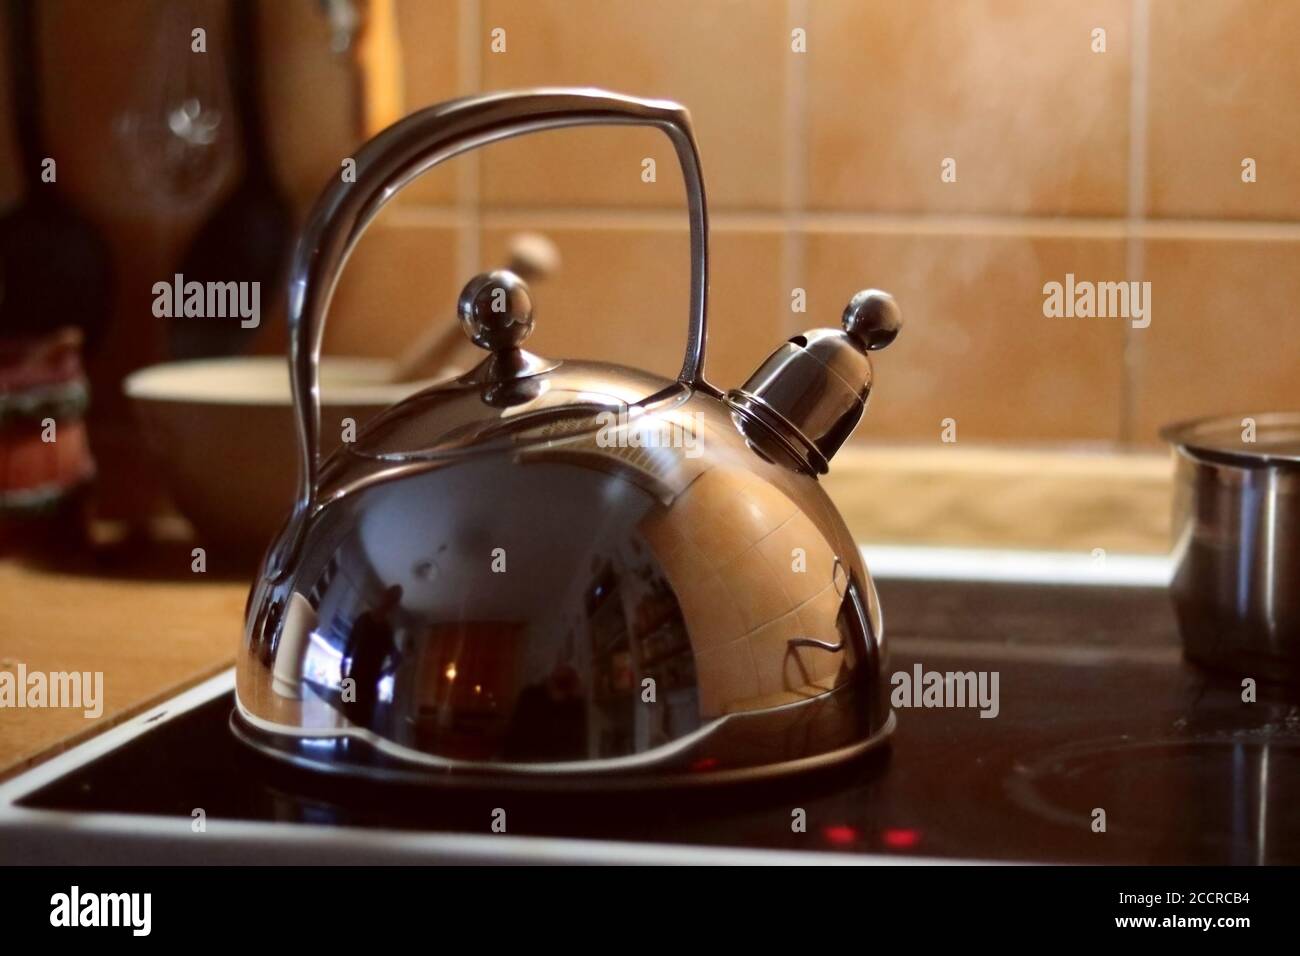 Silver Metal Tea Kettle Blowing Steam As Reaches Boiling Stock